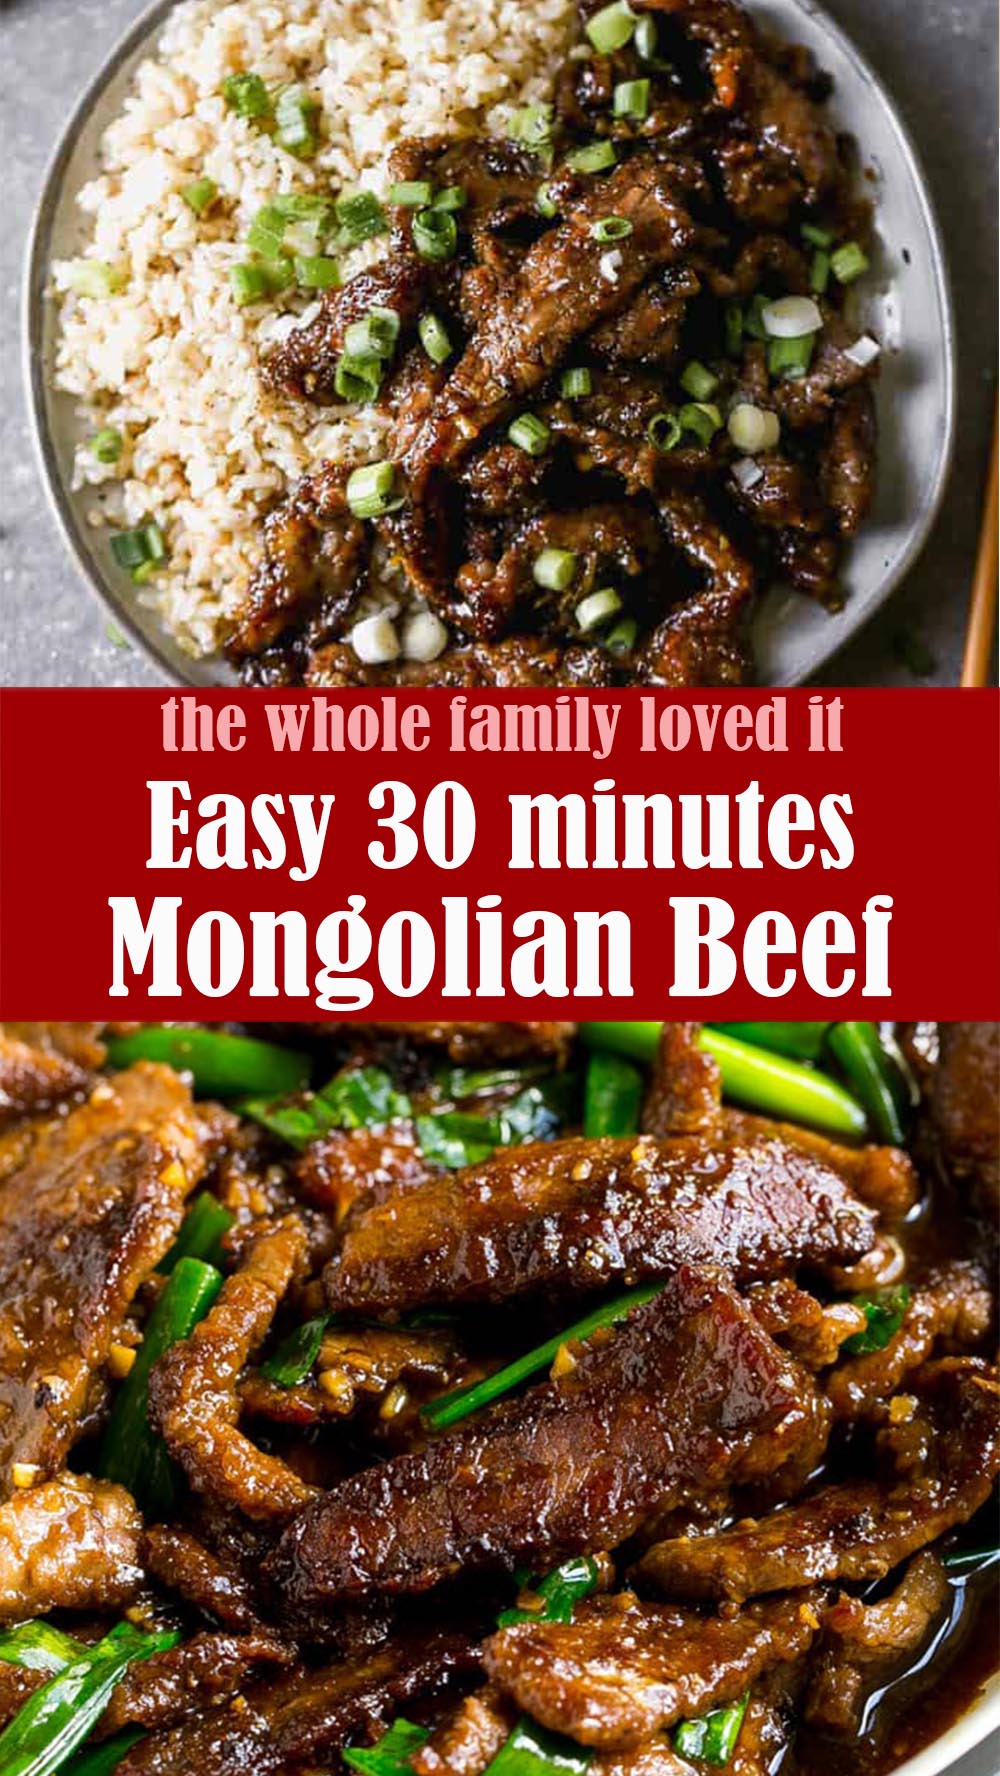 Easy 30 minutes Mongolian Beef Recipe